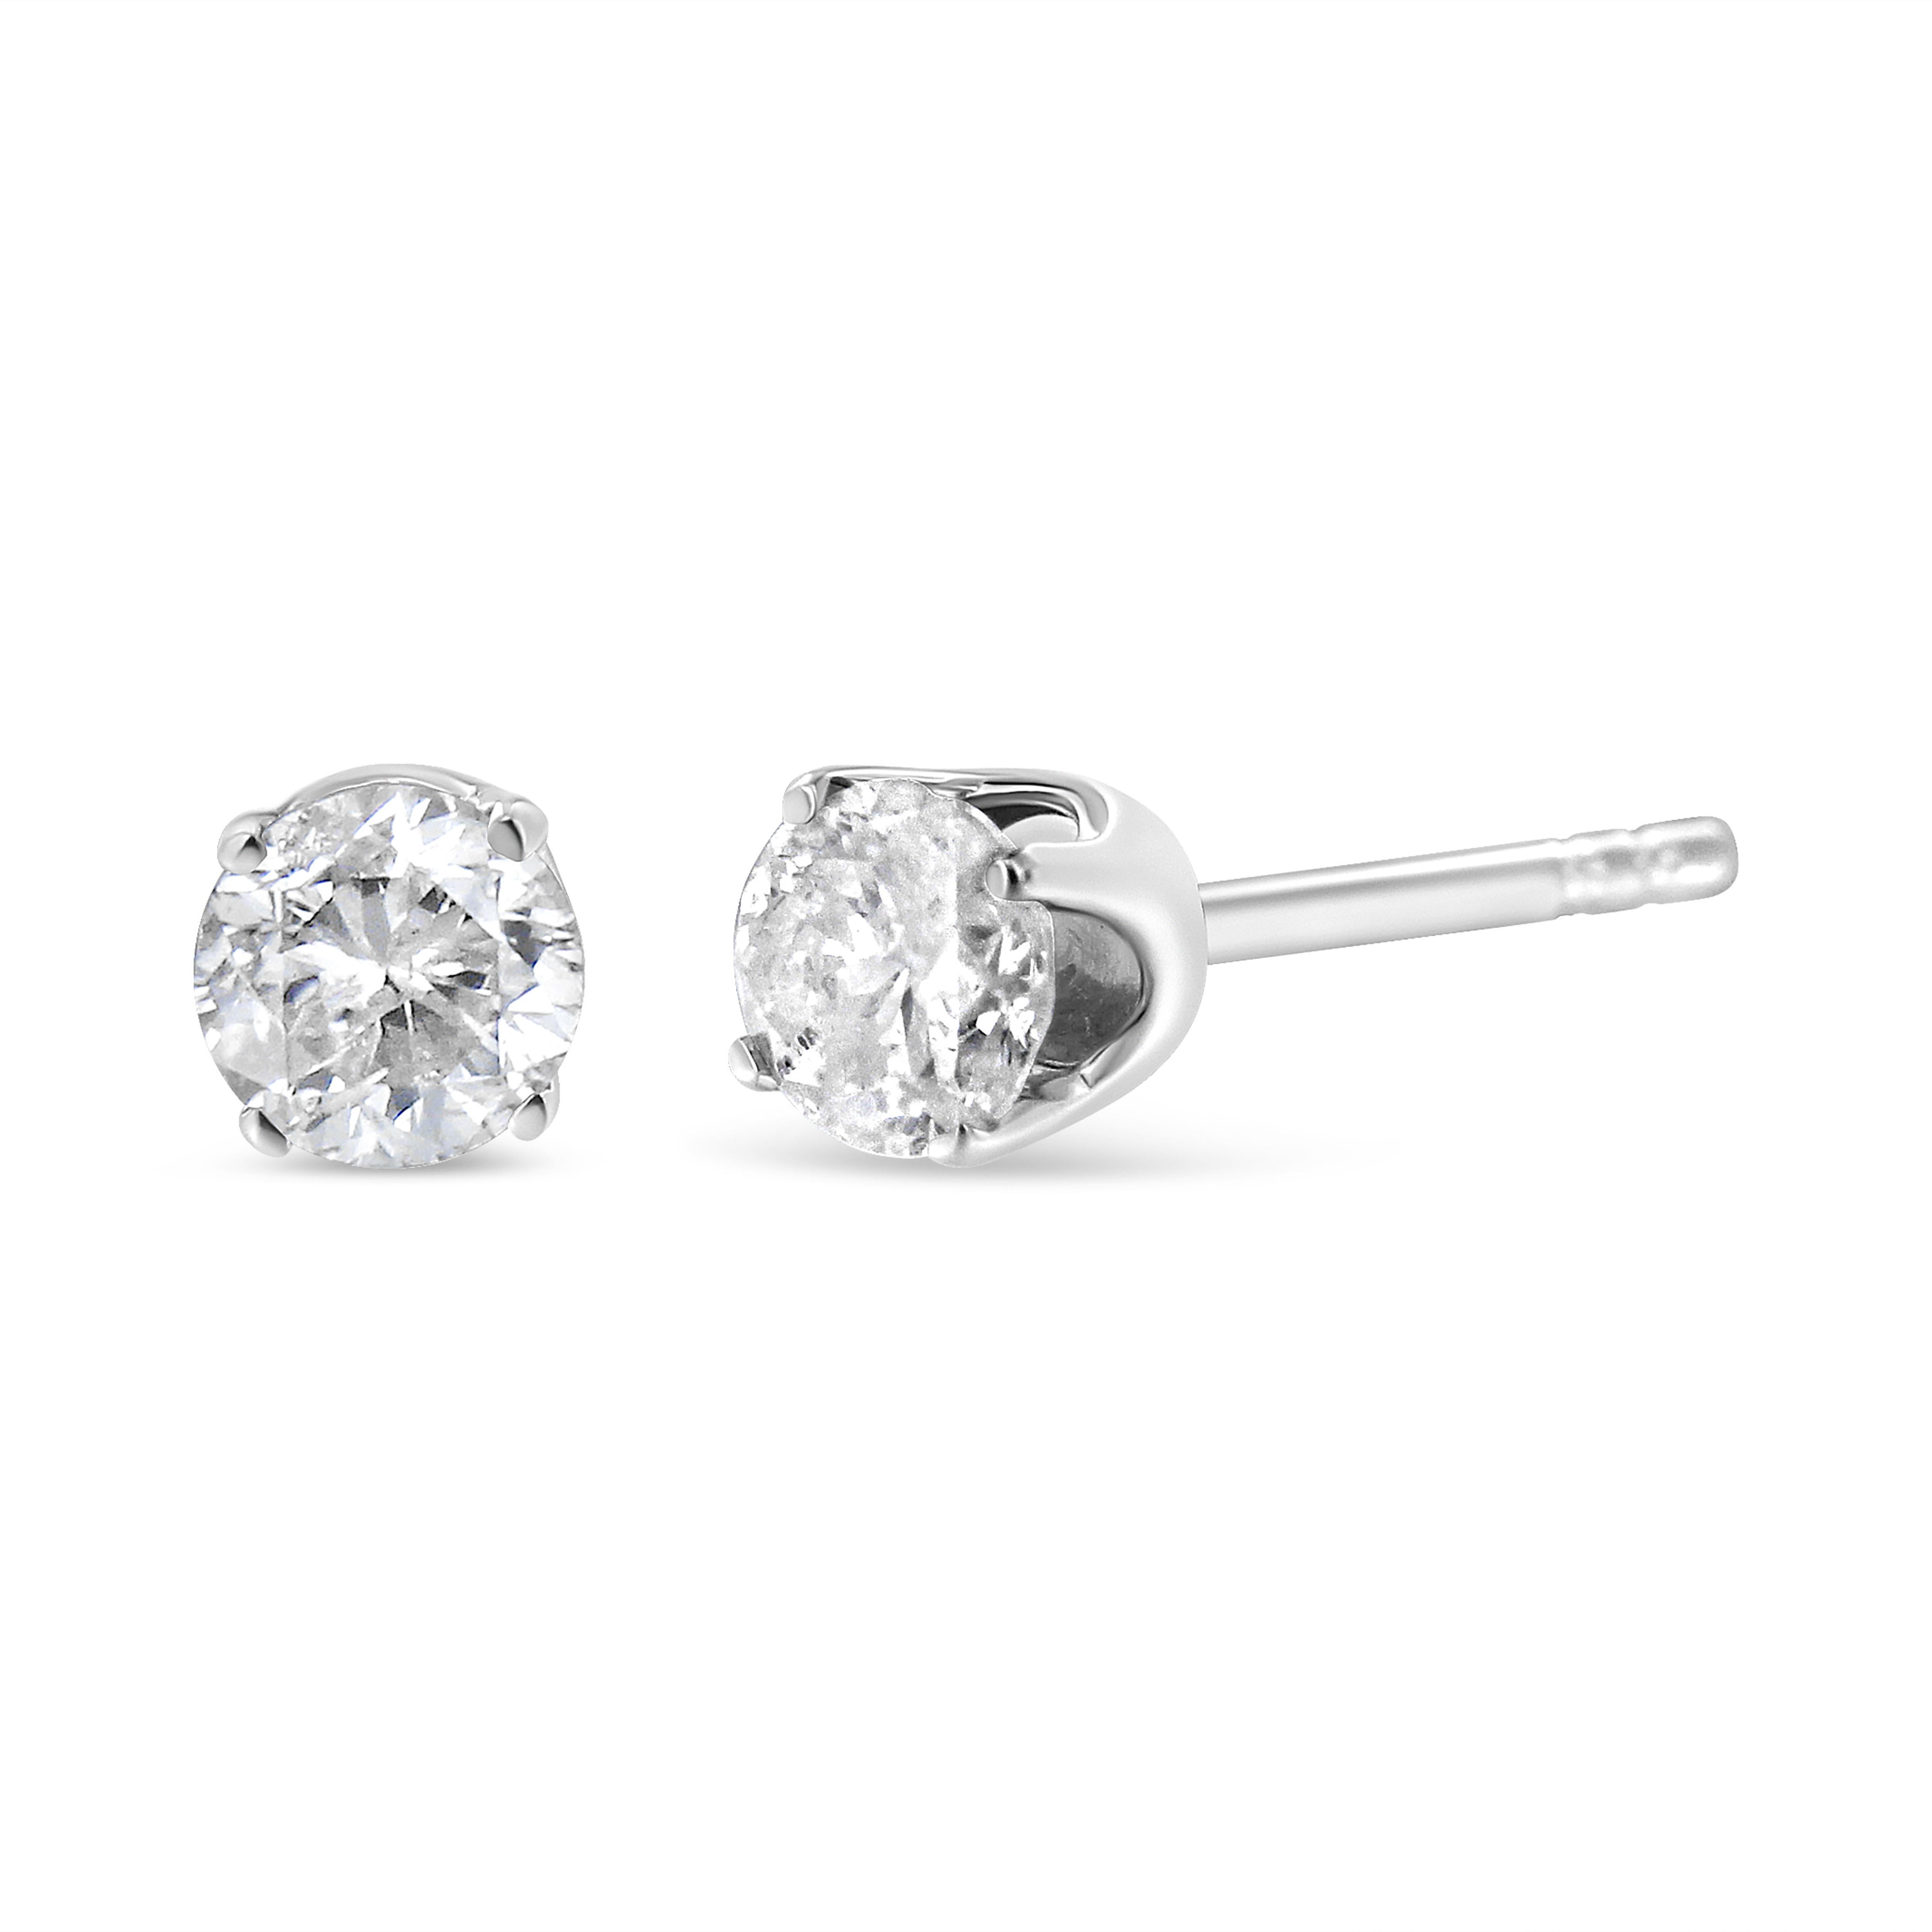 Round Cut 14K White Gold 1.0 Carat Diamond Solitaire Stud Earrings For Sale